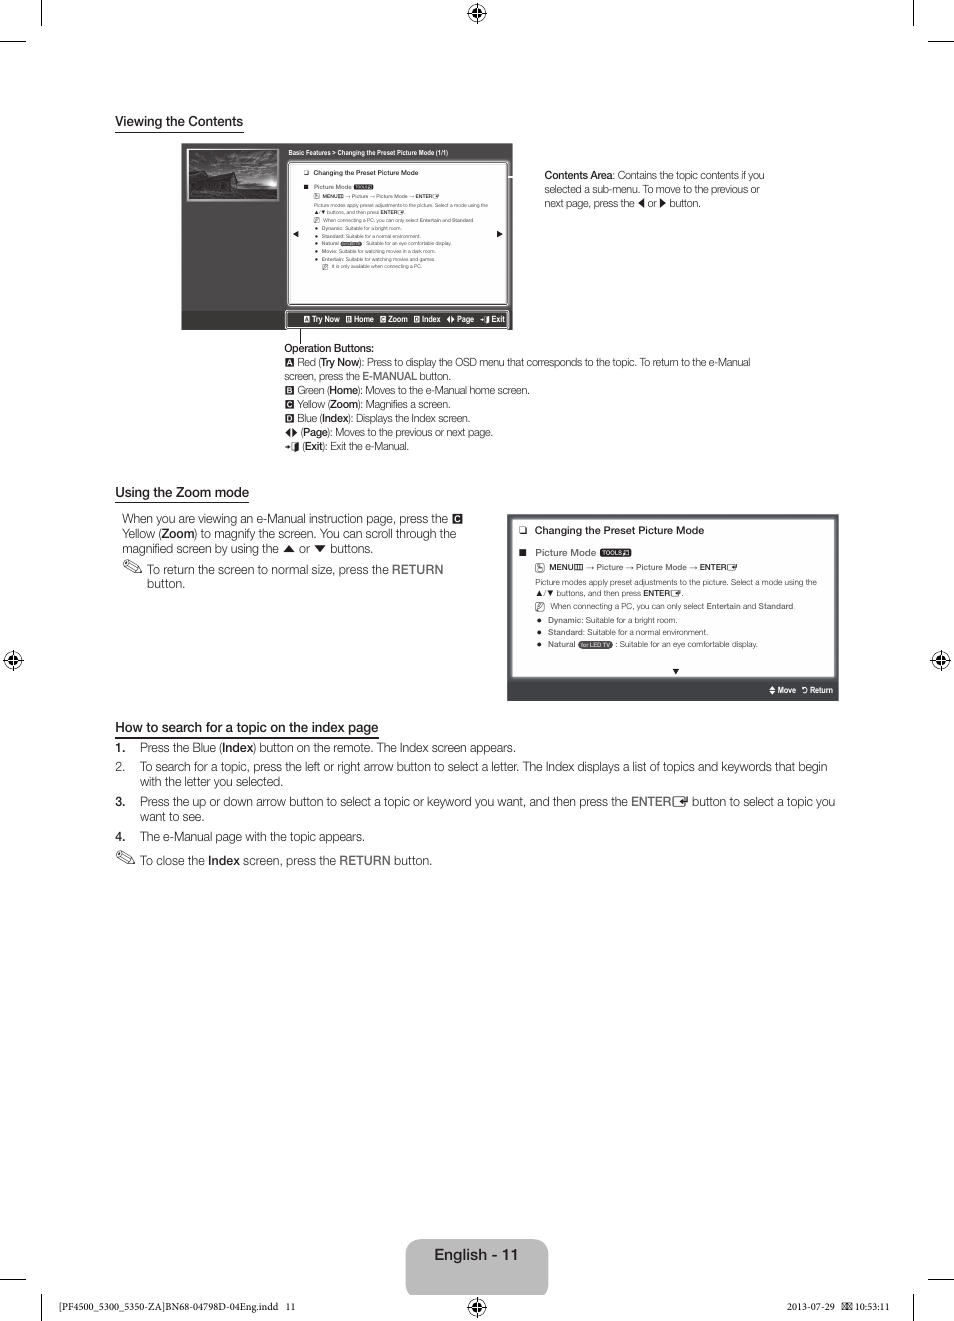 English - 11, Viewing the contents | Samsung PN51F4550AFXZA User Manual